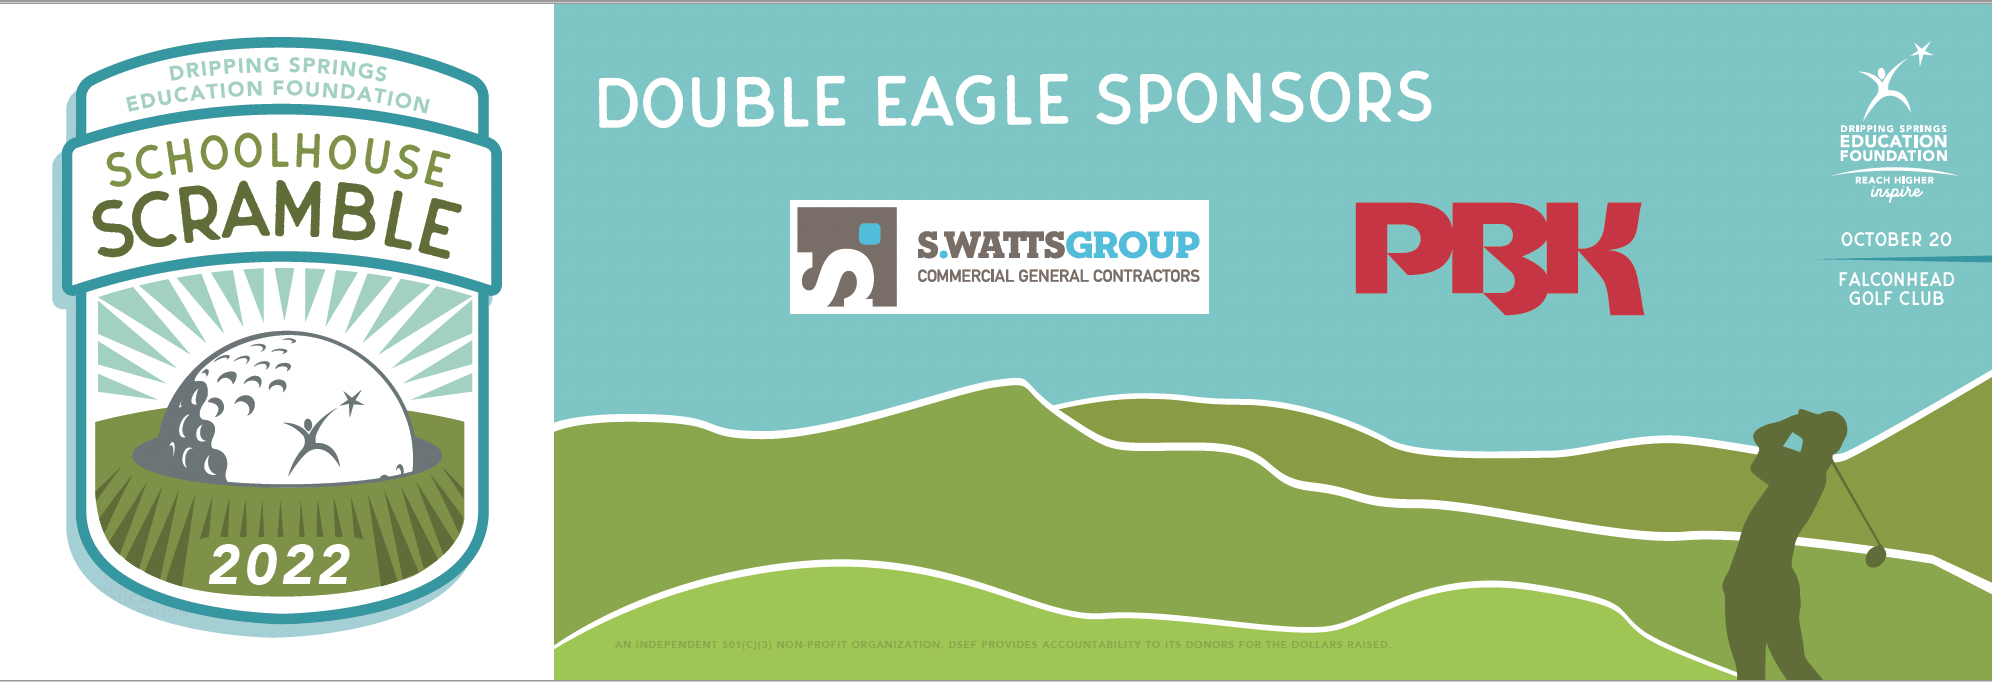 DOUBLE EAGLE SPONSOR S WATTS AND PBK